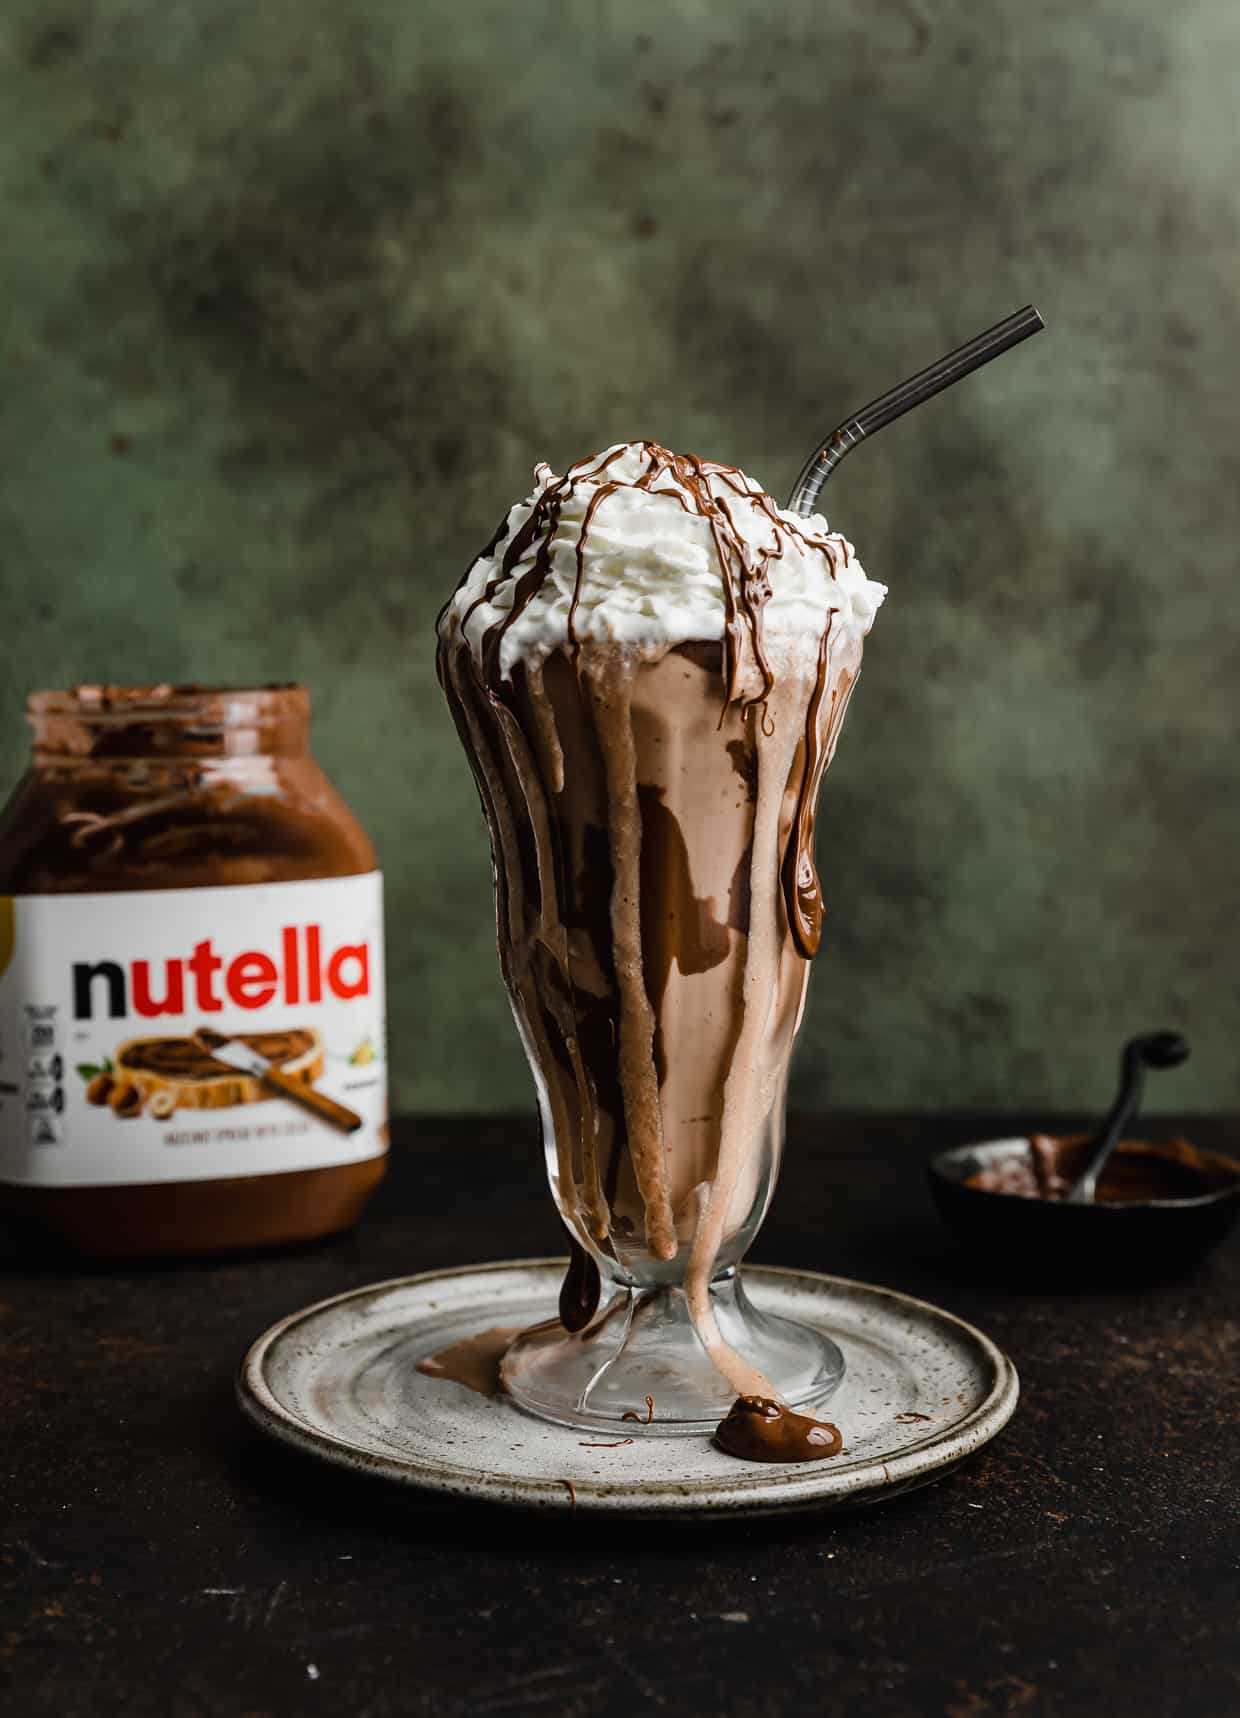 A glass milkshake cup with a Nutella Milkshake in it, topped with whipped topping and drizzled Nutella in front of a dark green background.